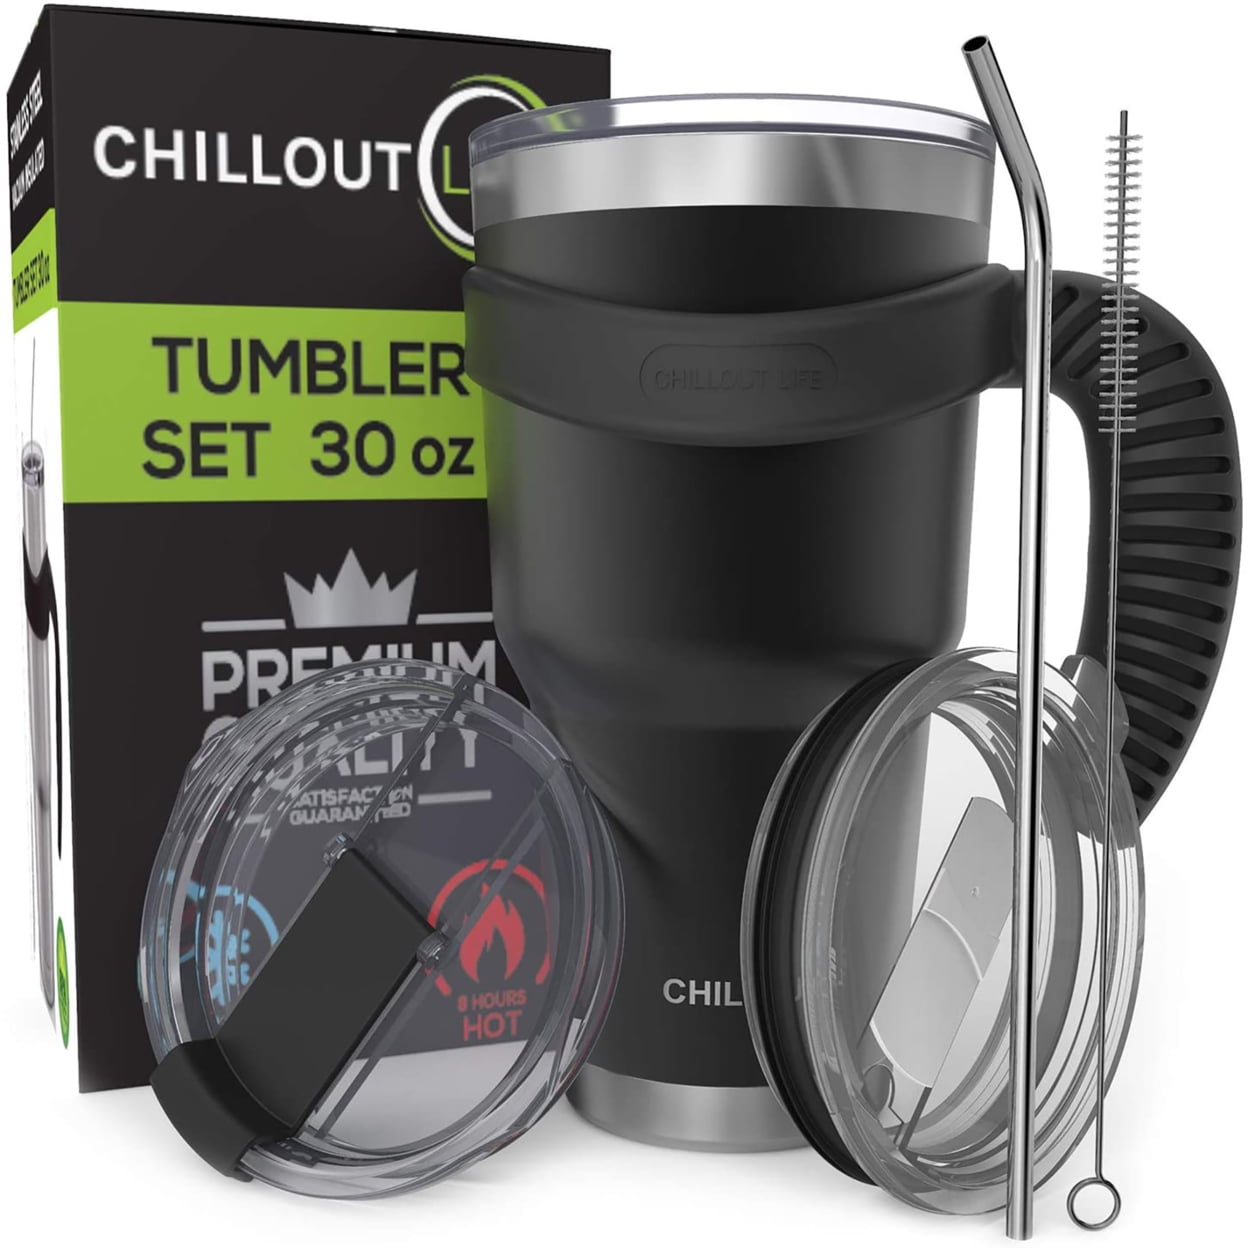 CHILLOUT LIFE 16 oz Stainless steel Vacuum Insulated Coffee Mug with Handle  and Lid, Large Thermal Camping Coffee Mugs with Sliding Lid for Men 